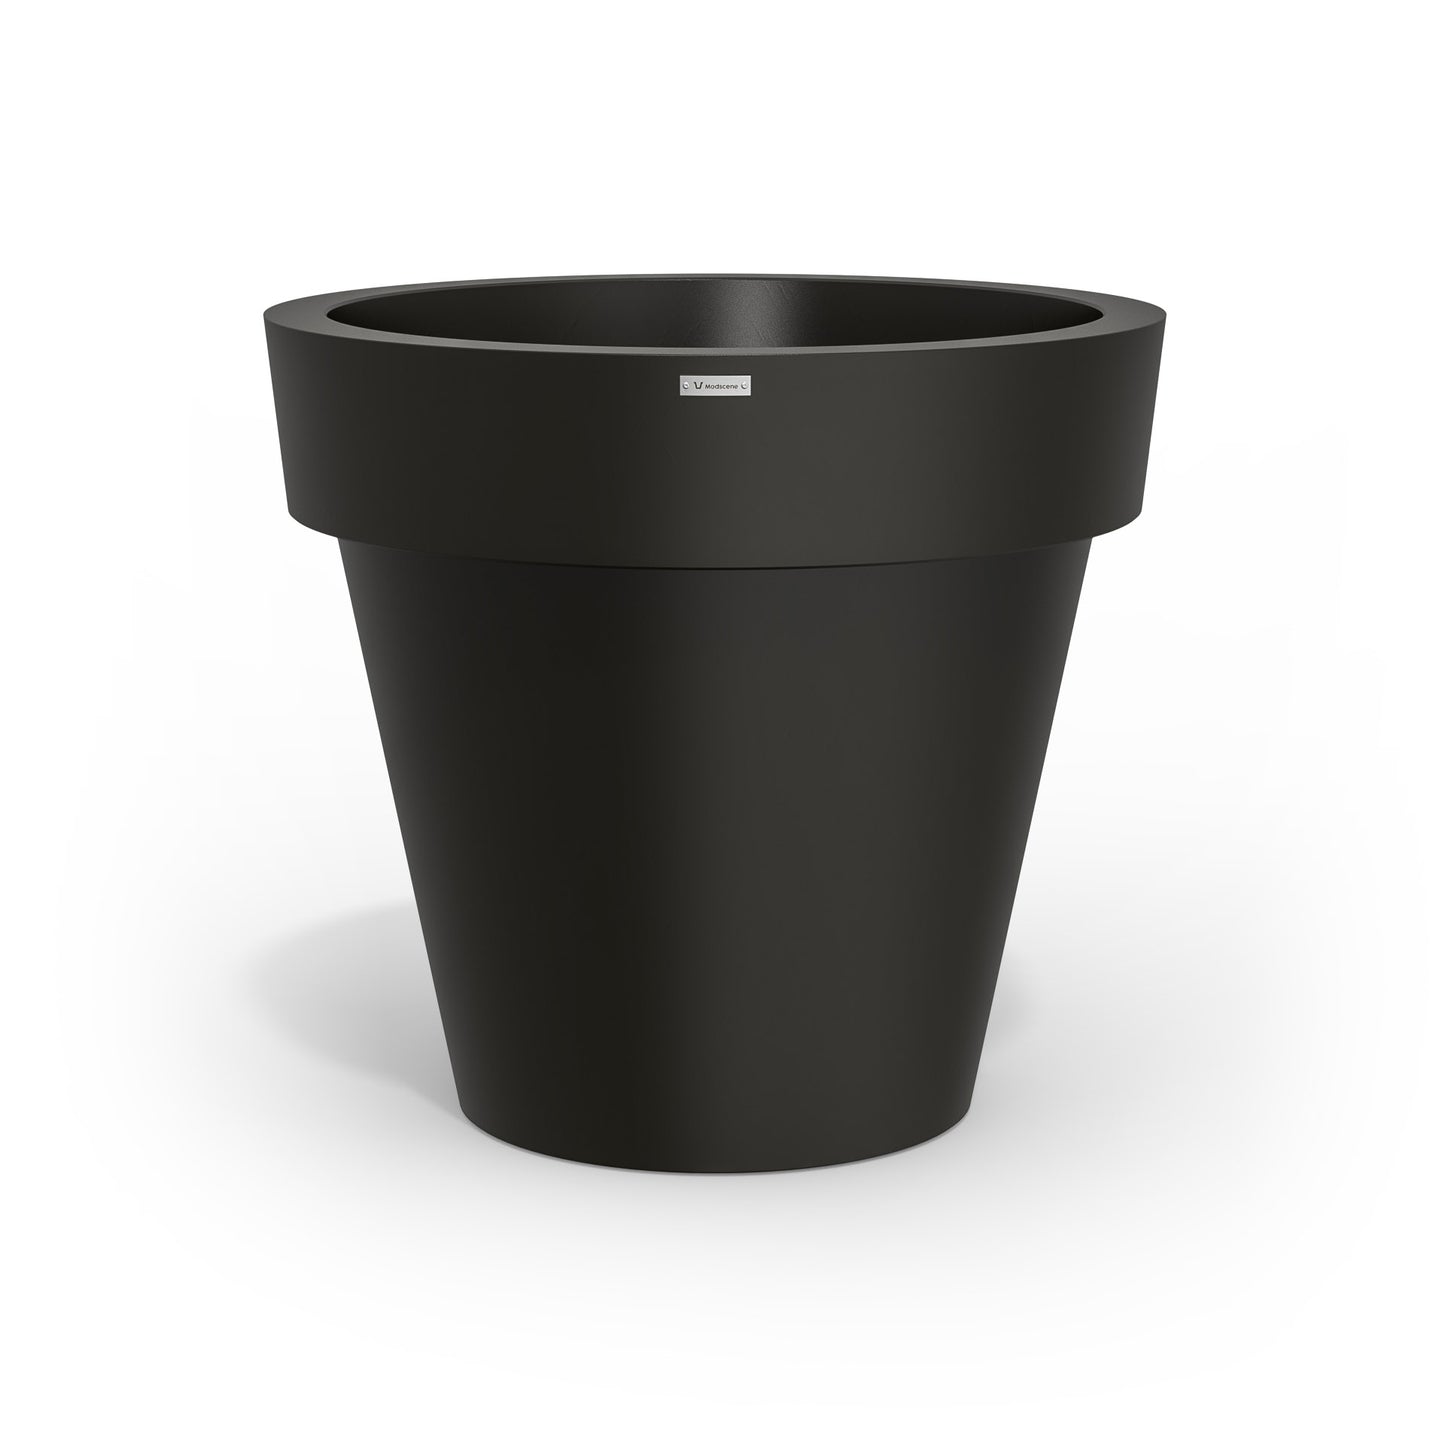 Black Modscene plastic planter pot that is large in size. NZ made.